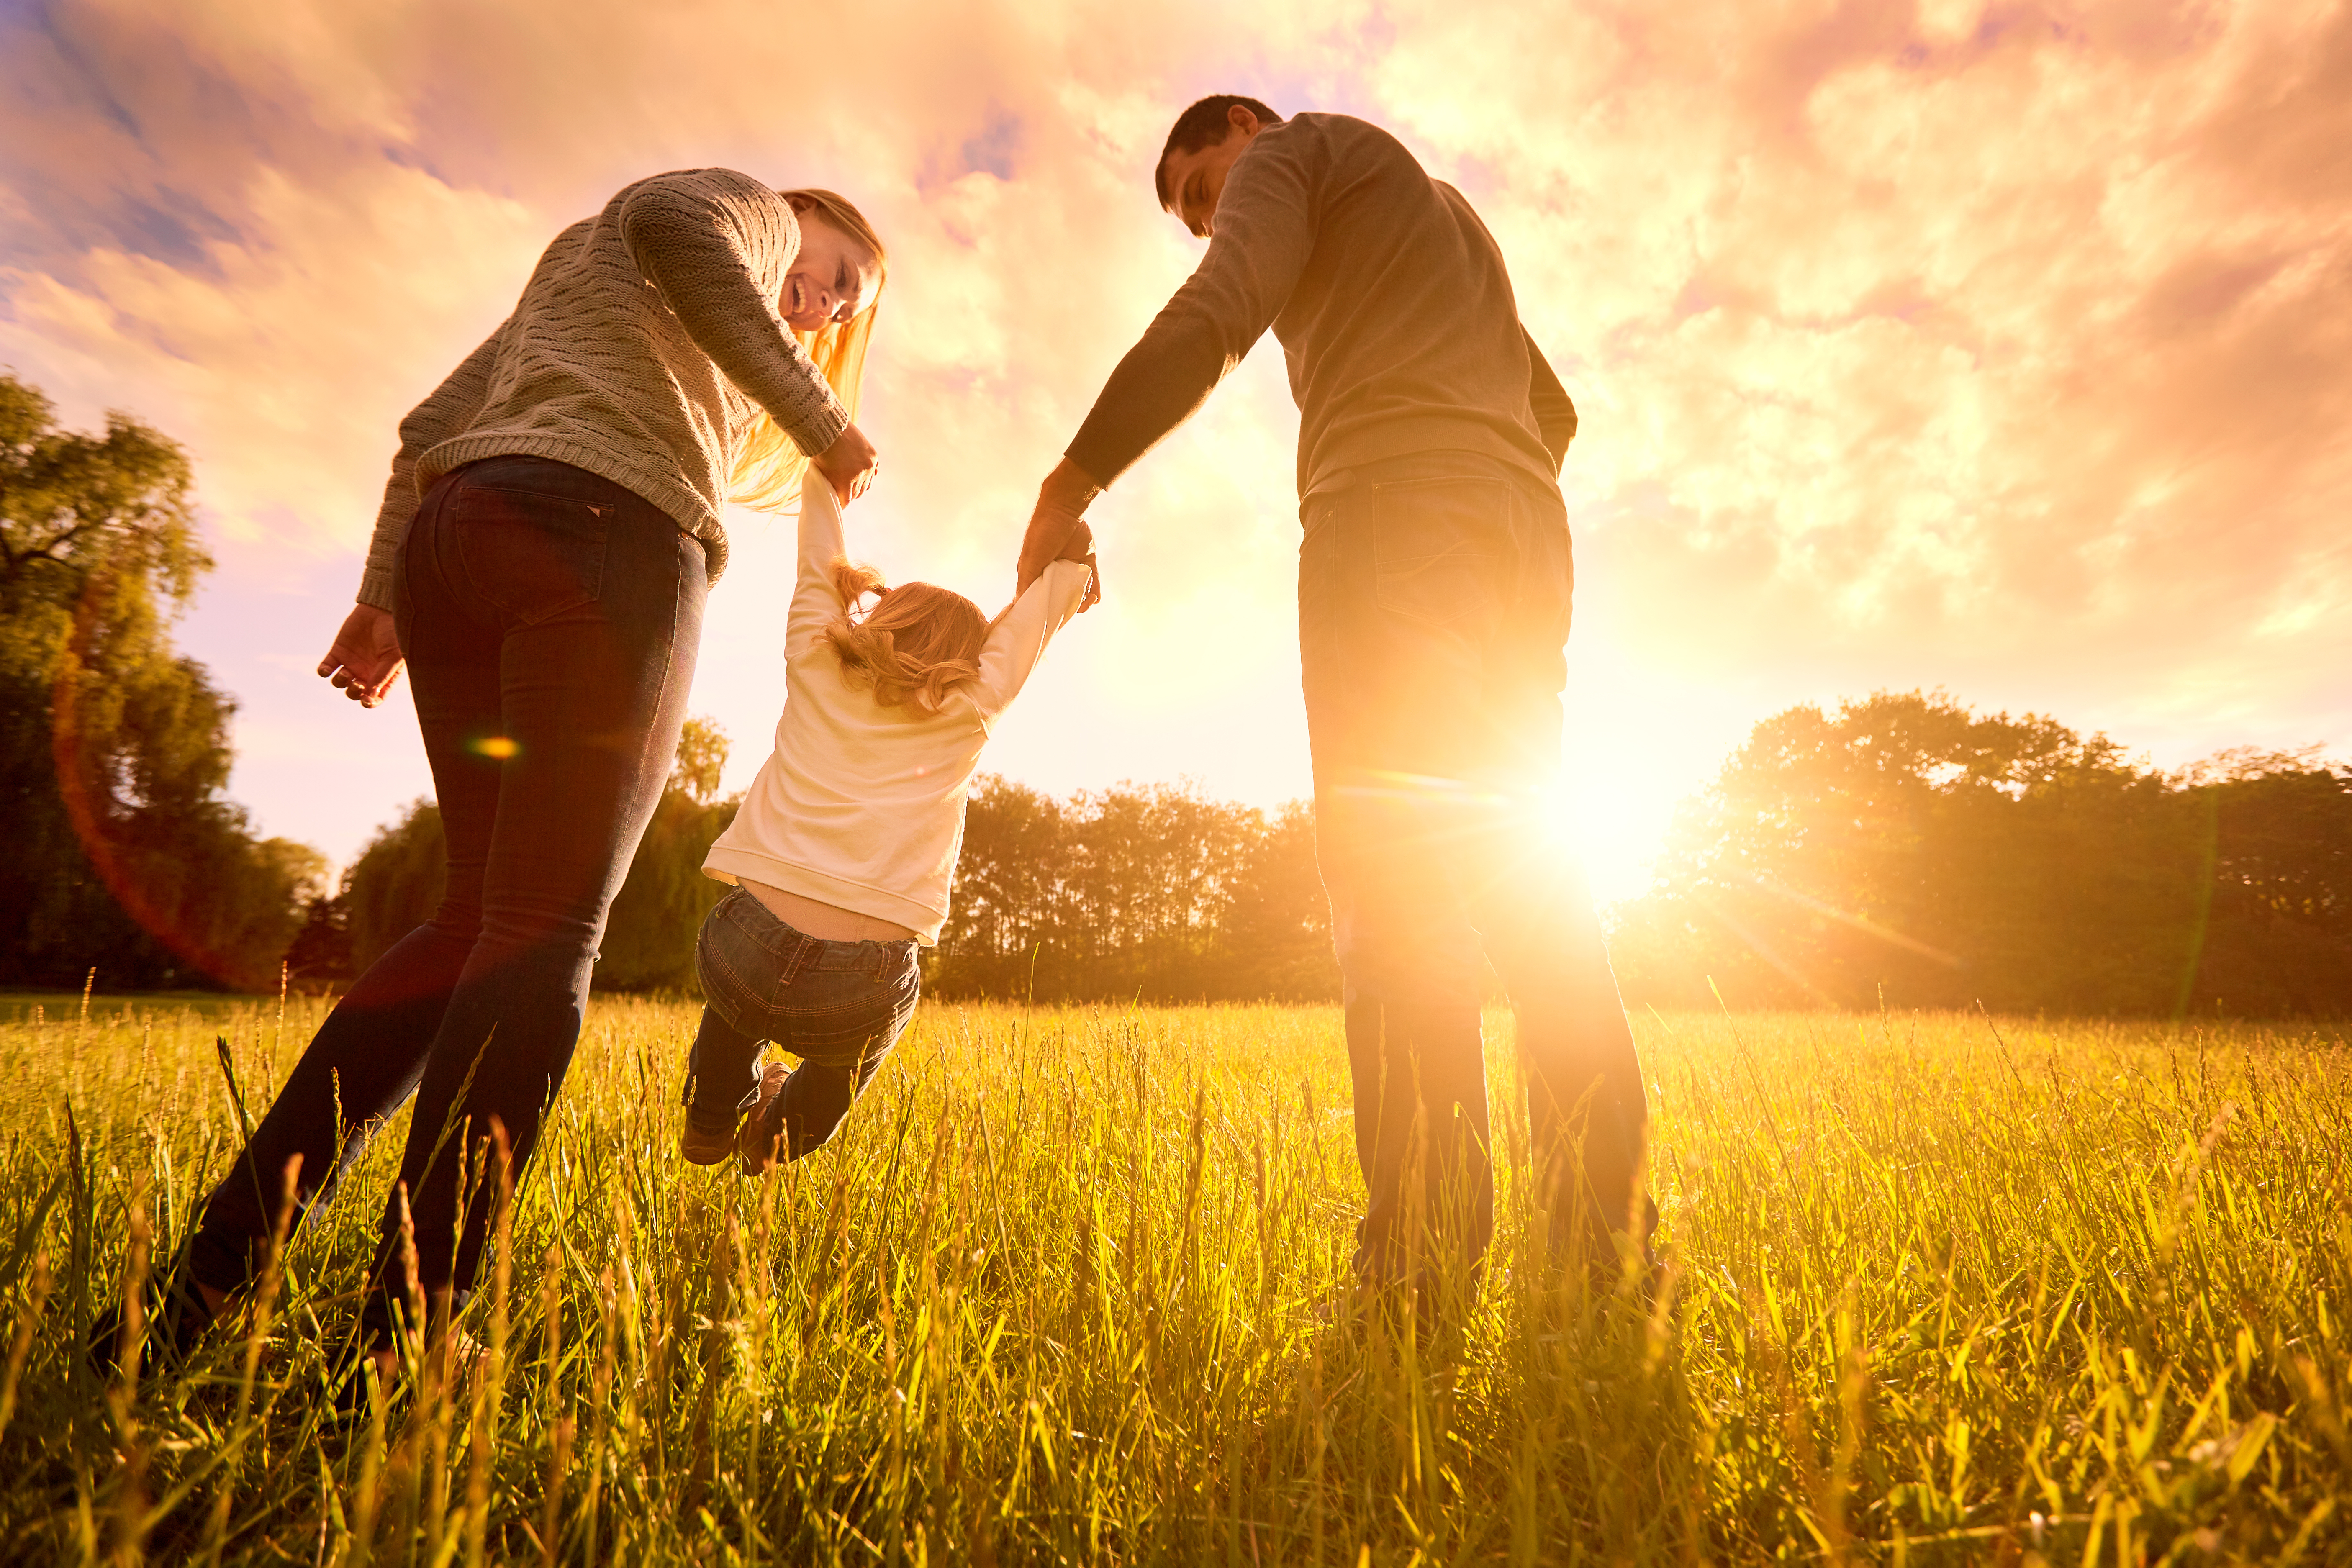 A man and a woman hoisting a child in the air on a grassy frield against the backdrop of the sunset | Source: Shutterstock